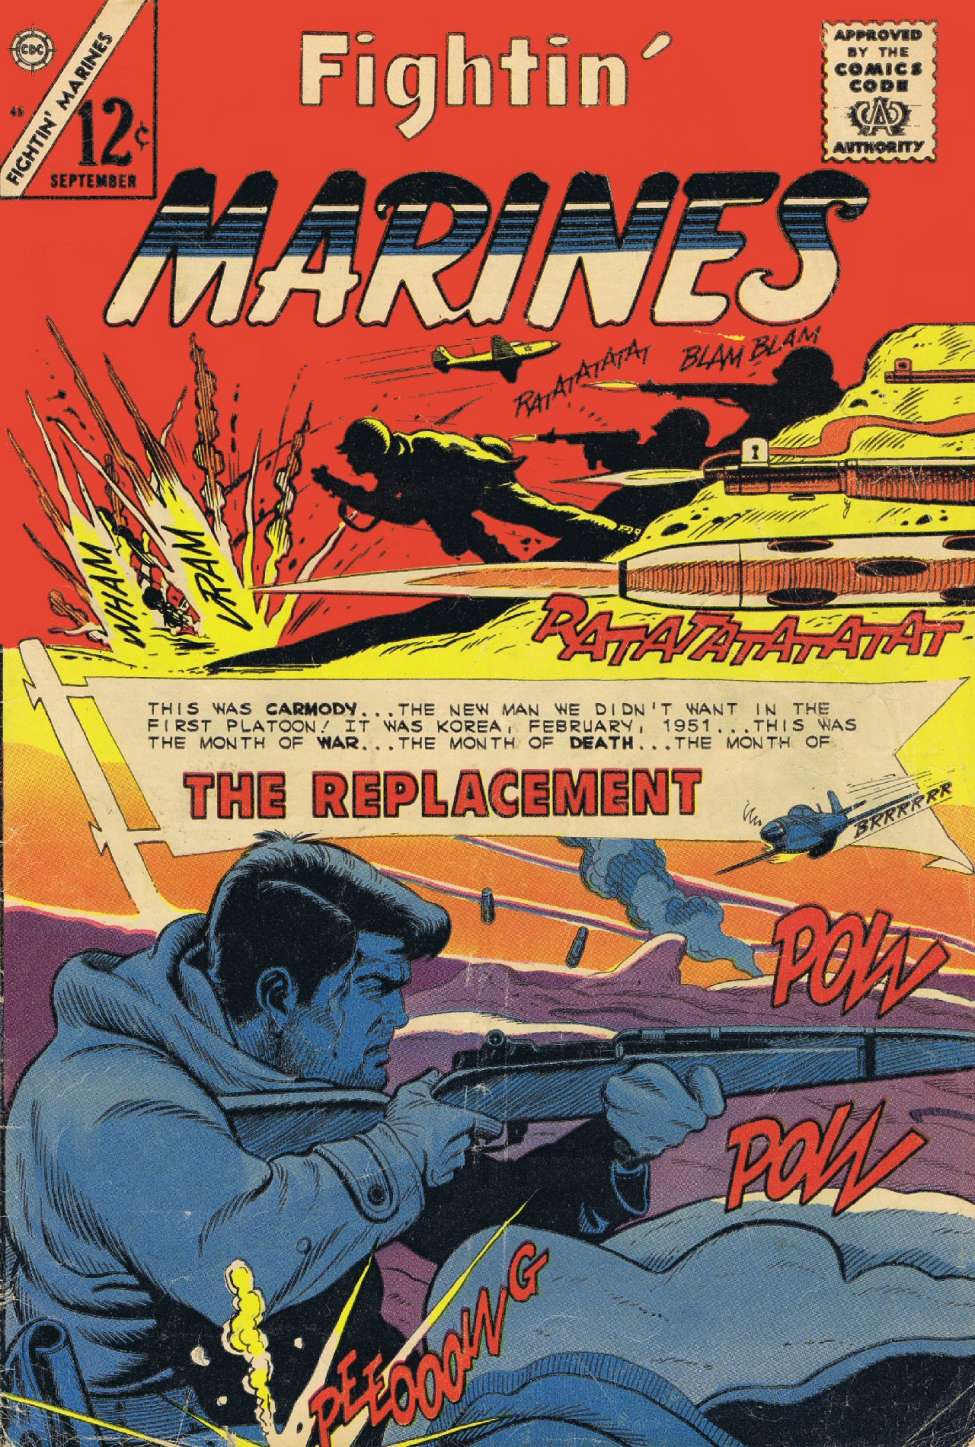 Book Cover For Fightin' Marines 65